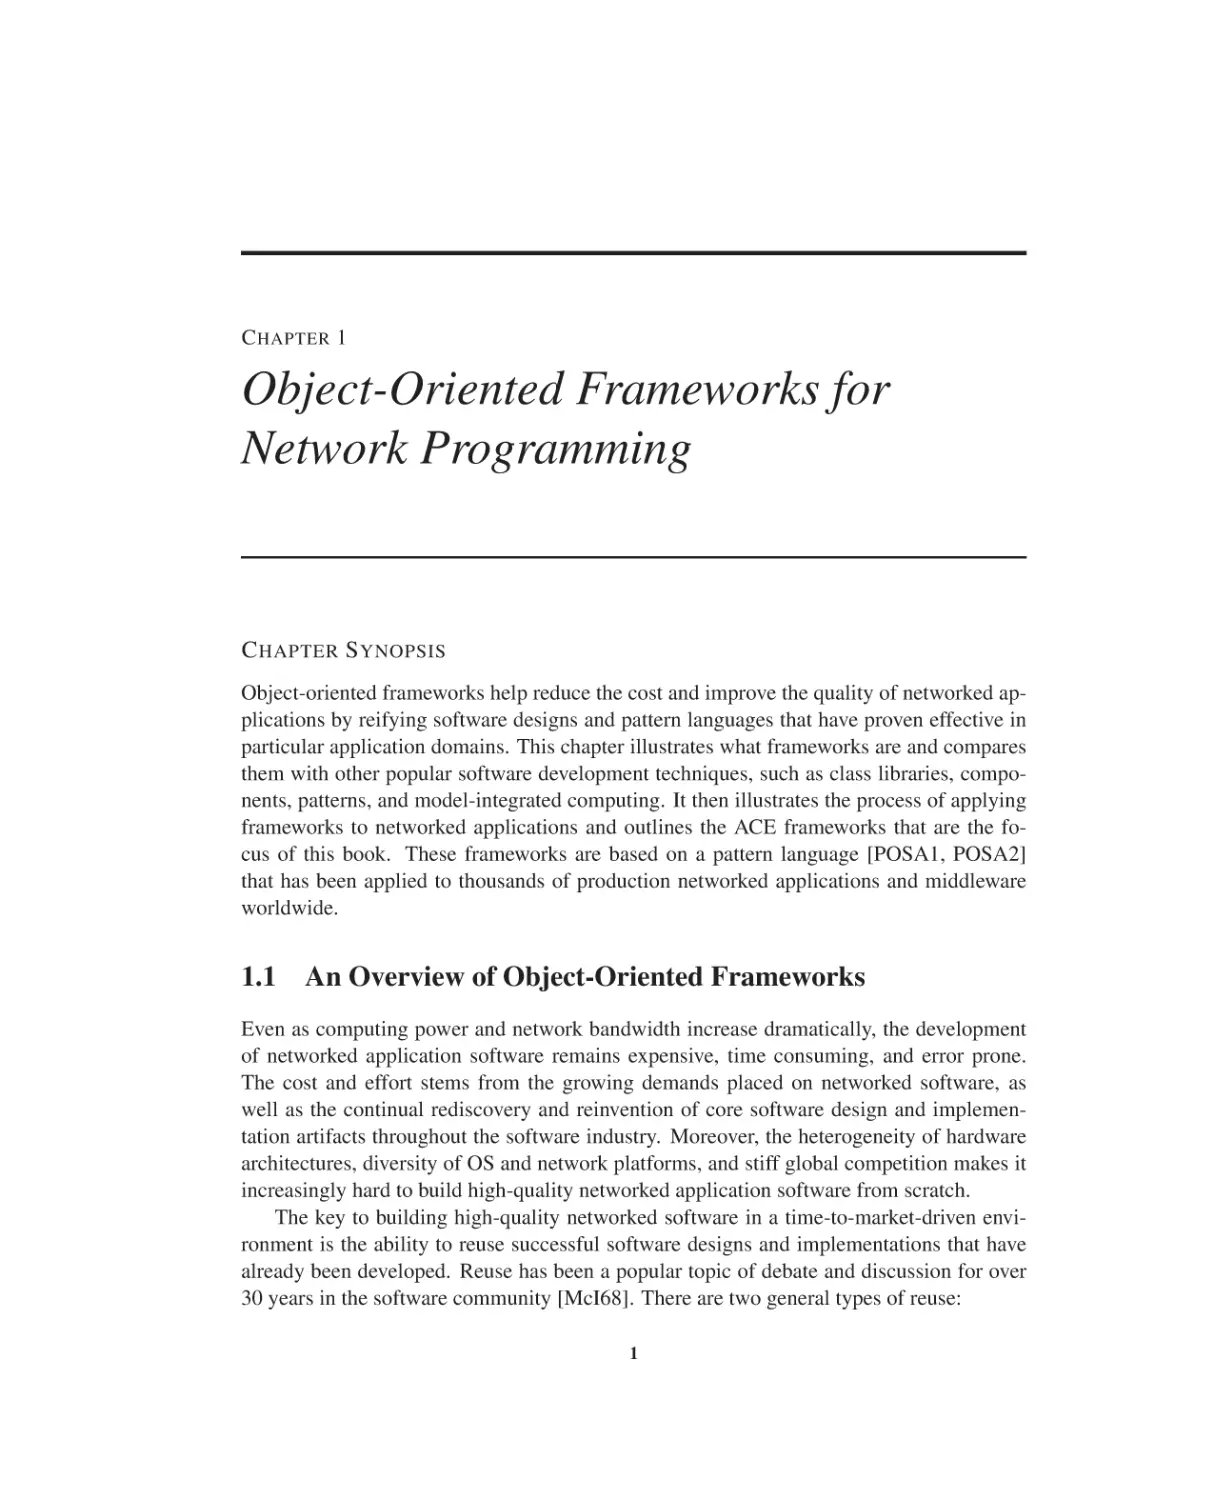 Chapter 1 Object-Oriented Frameworks for Network Programming
1.1 An Overview of Object-Oriented Frameworks